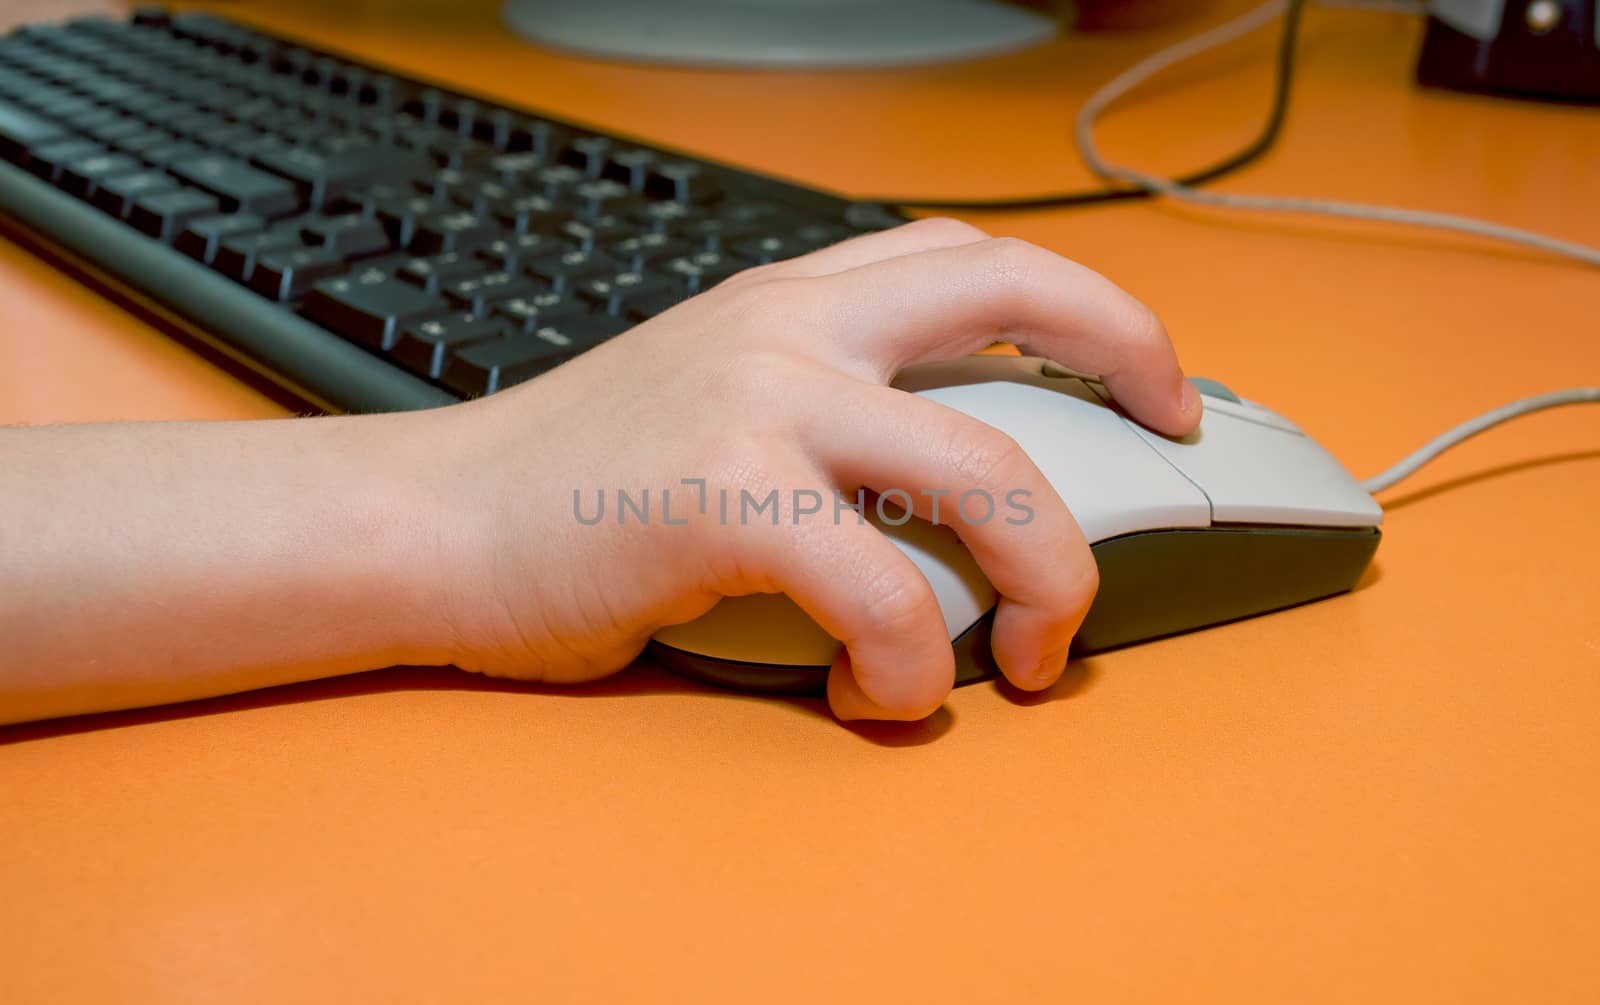 Baby hand on computer mouse by Krakatuk